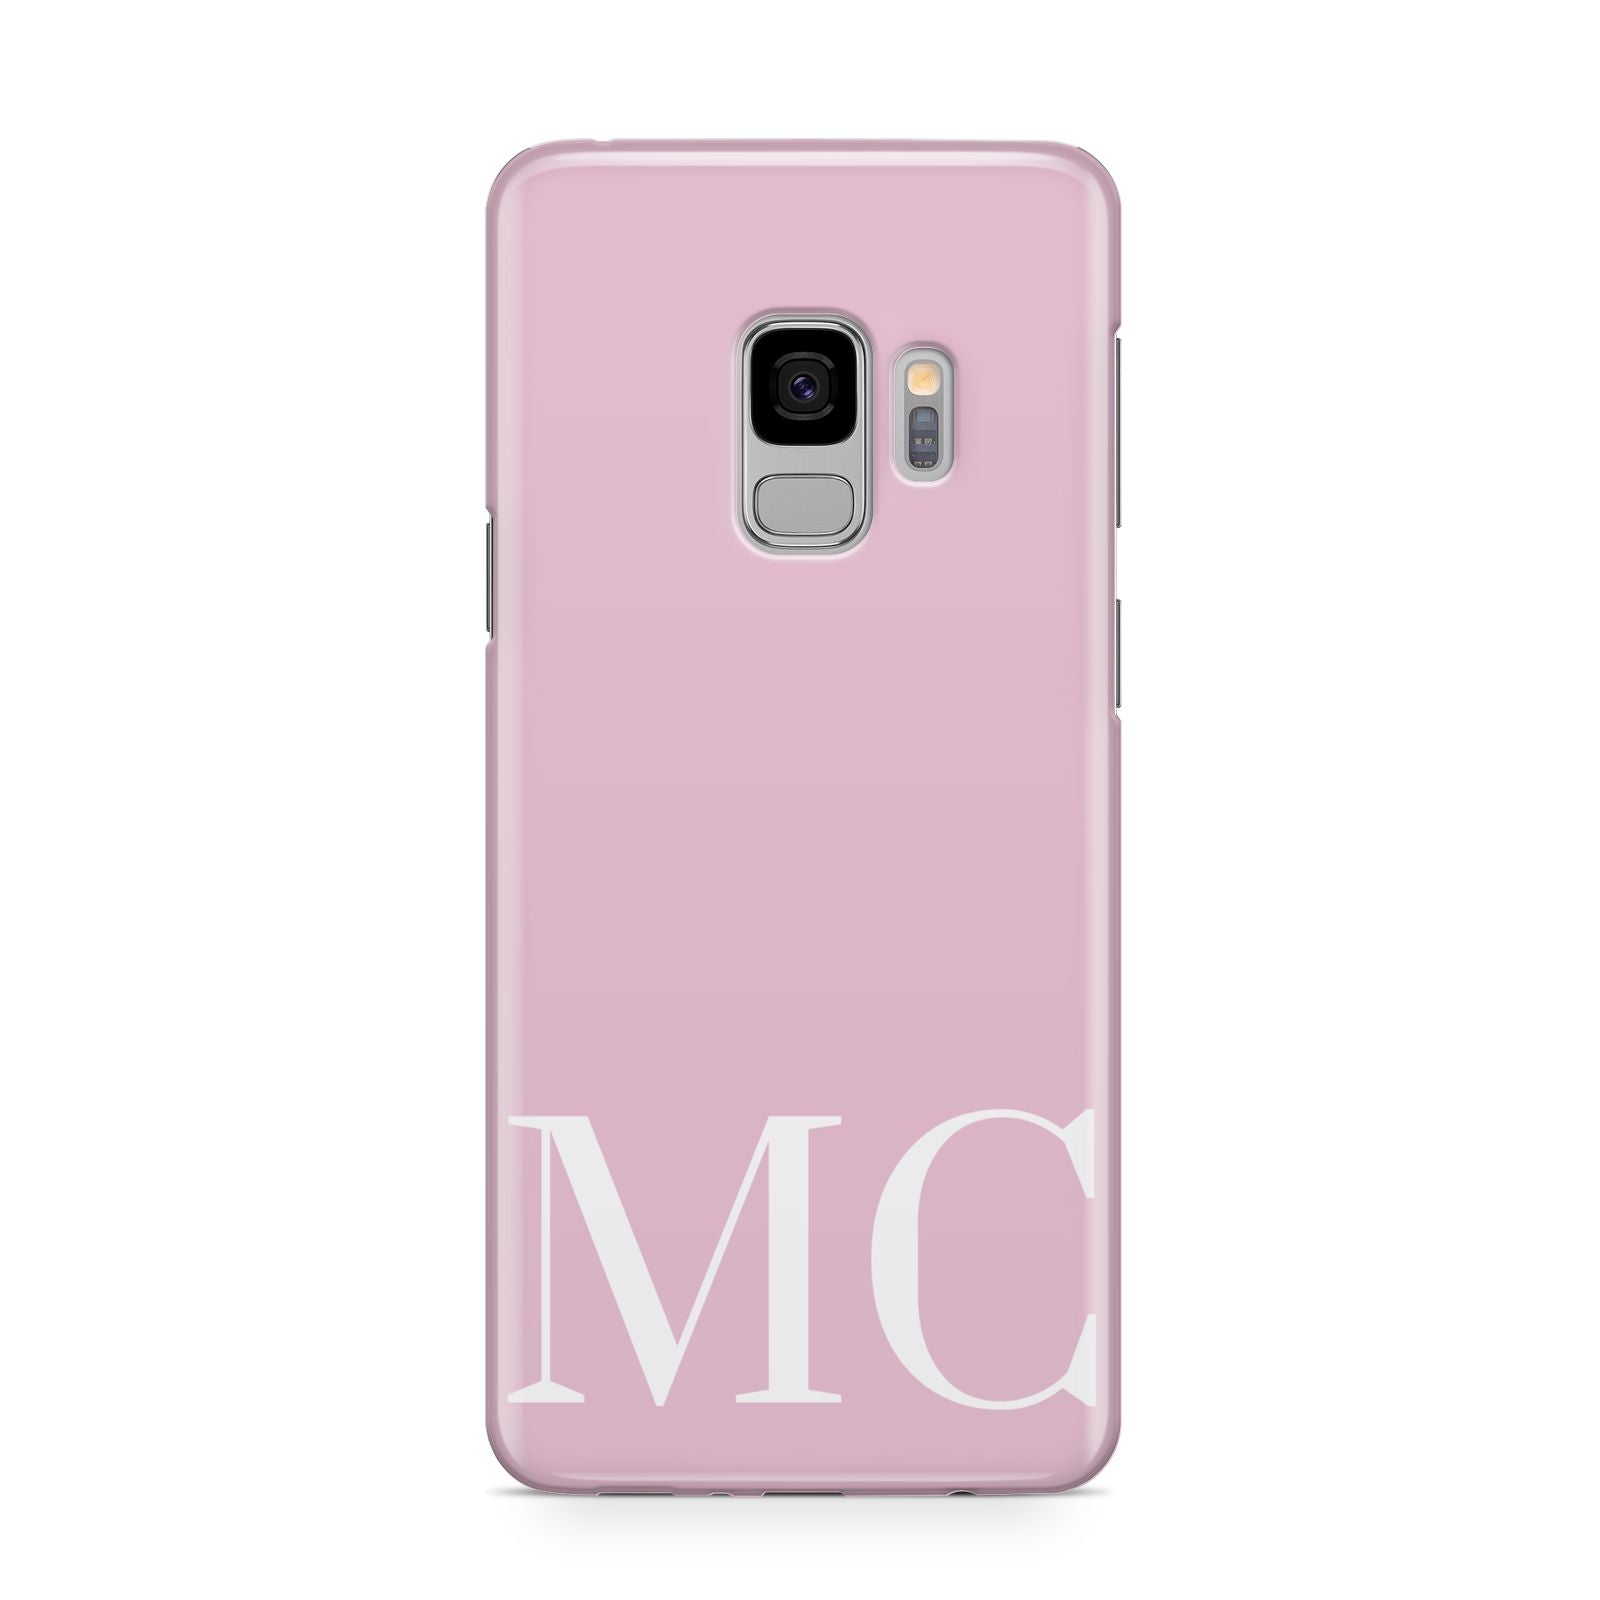 Initials Personalised 2 Samsung Galaxy S9 Case